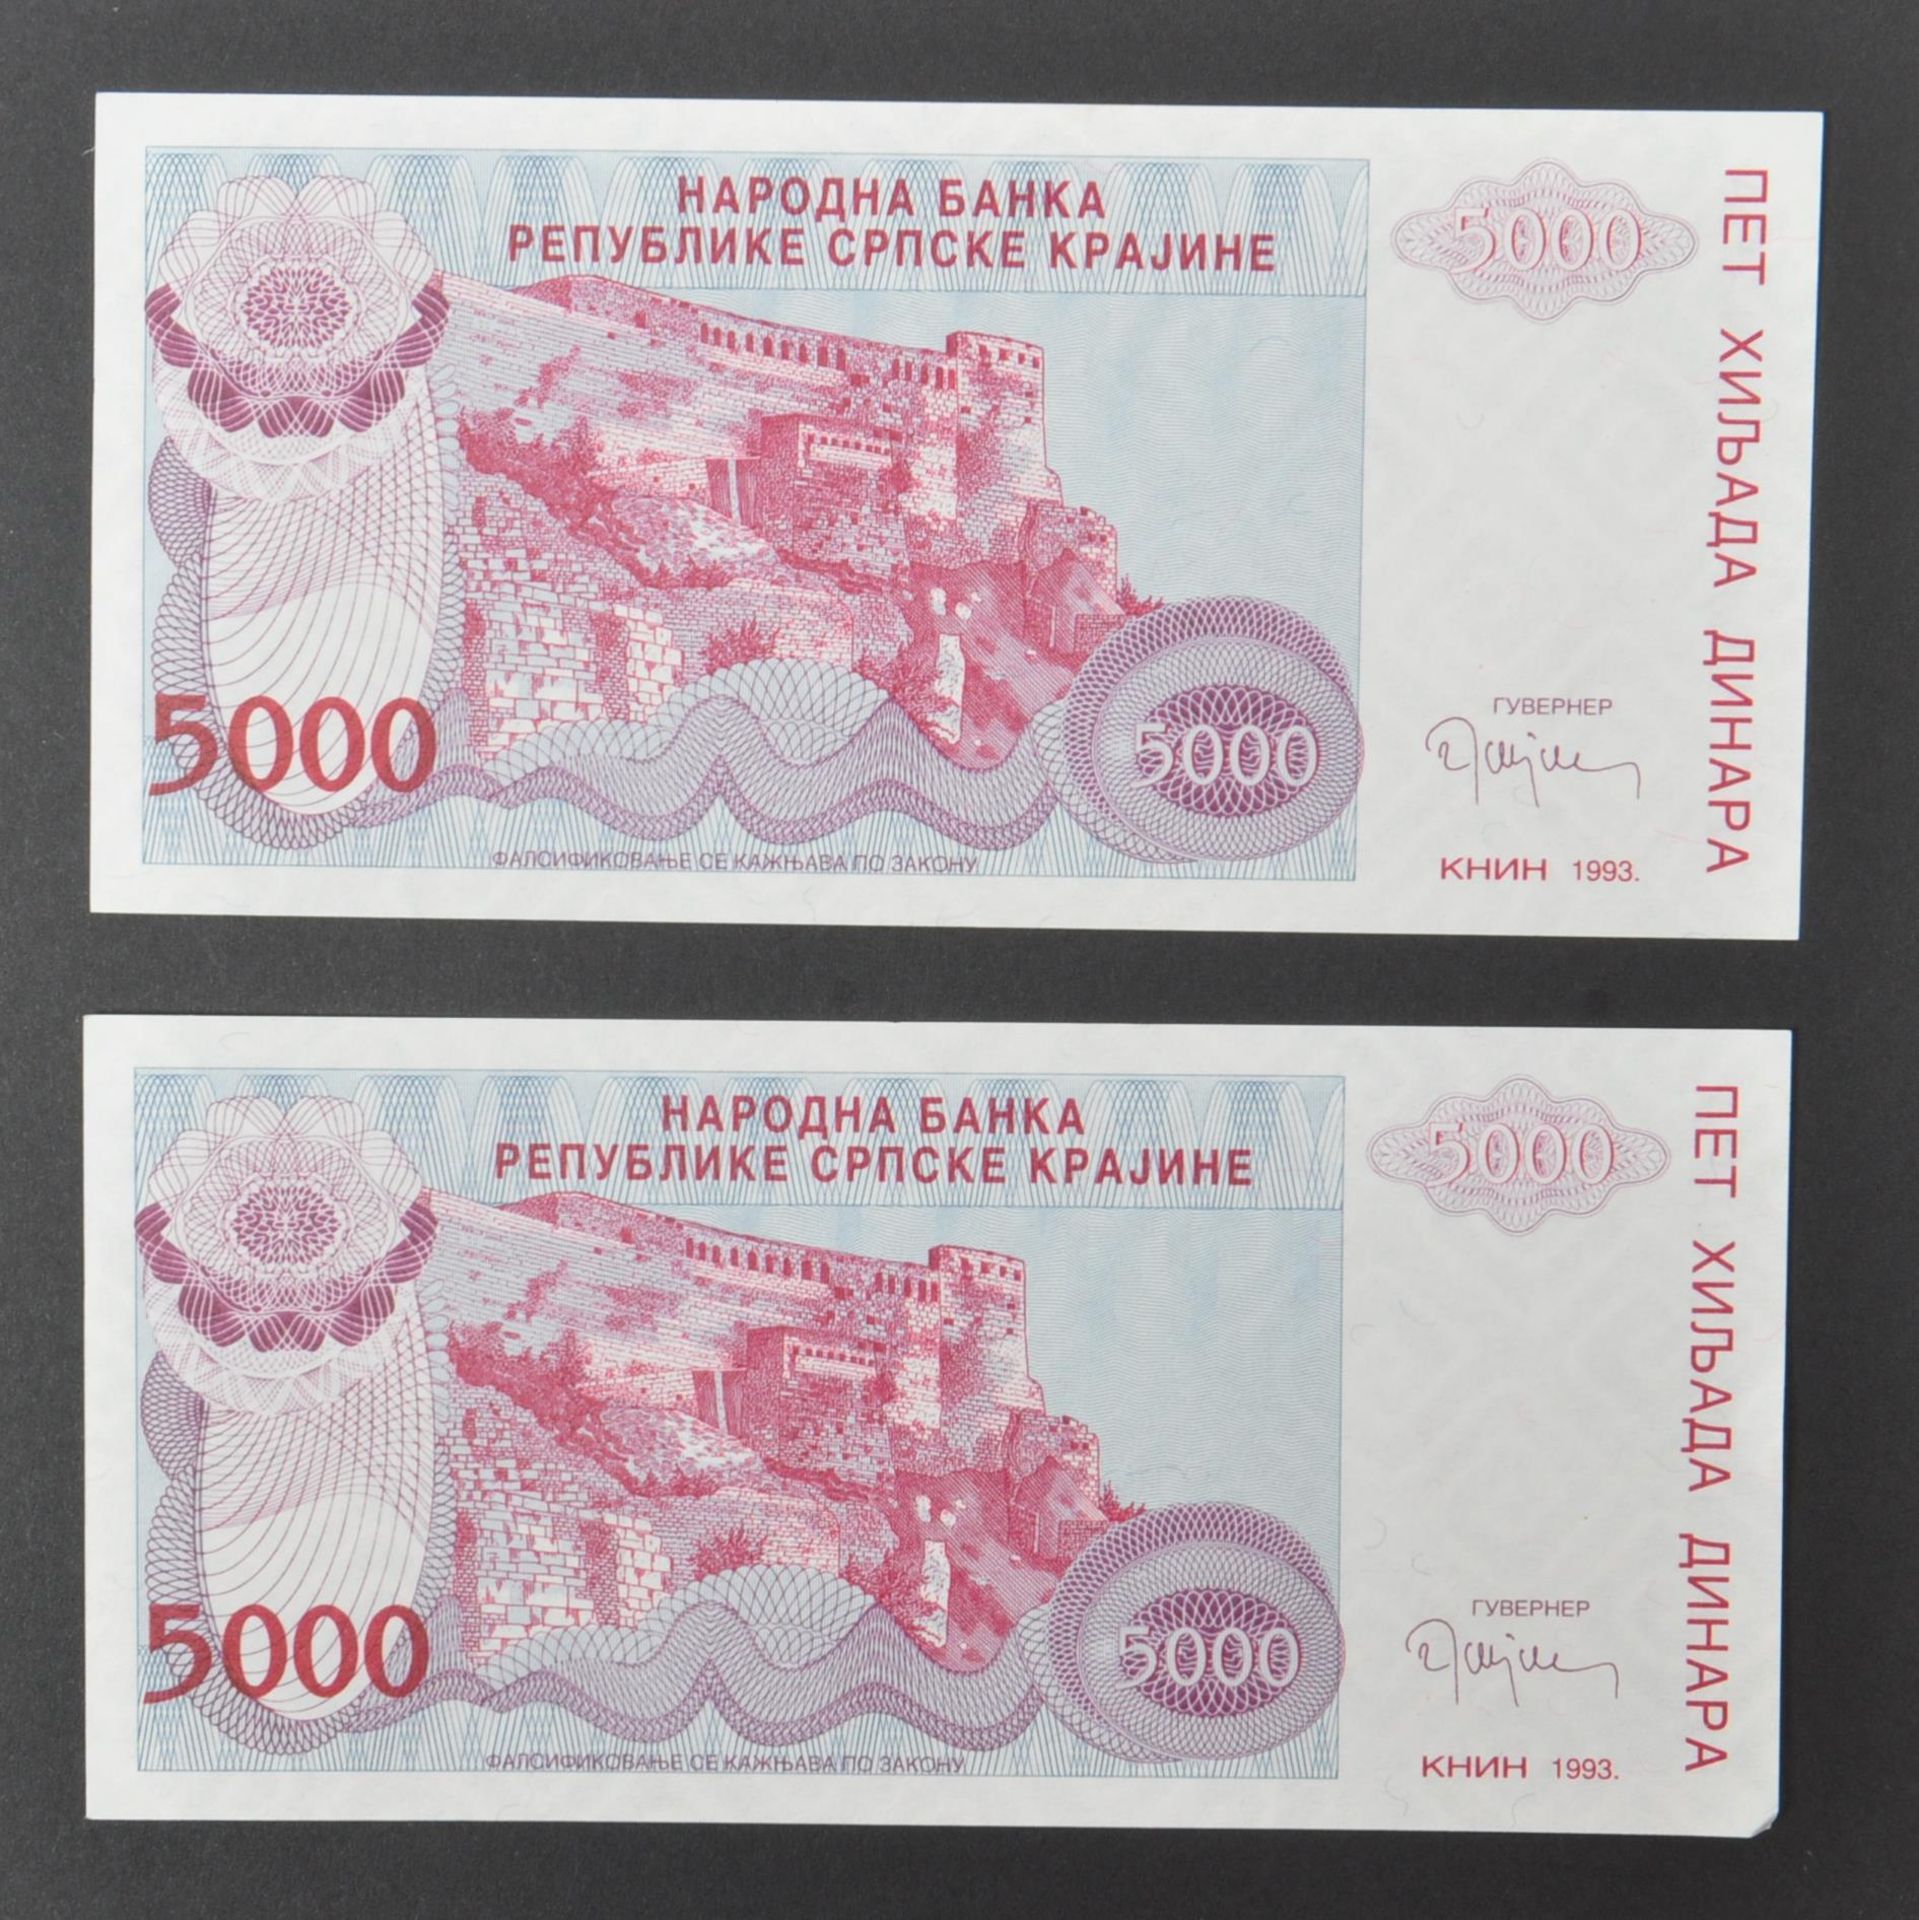 INTERNATIONAL MOSTLY UNCIRCULATED BANK NOTES - EUROPE - Image 24 of 30